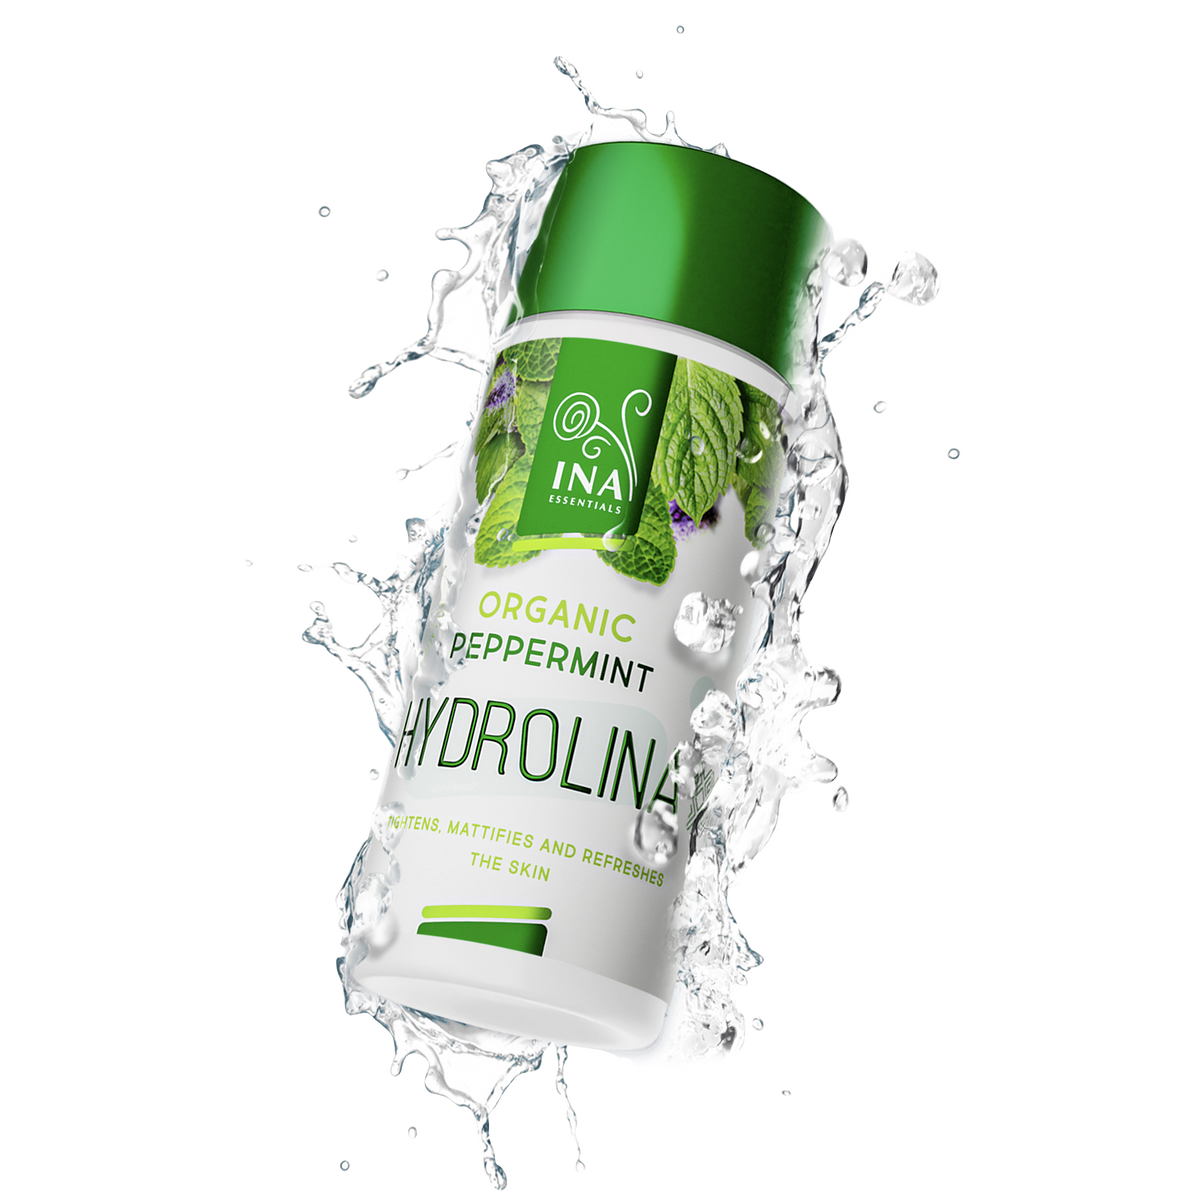 Organic Peppermint Water - Hydrolina for tight skin and Matte effect